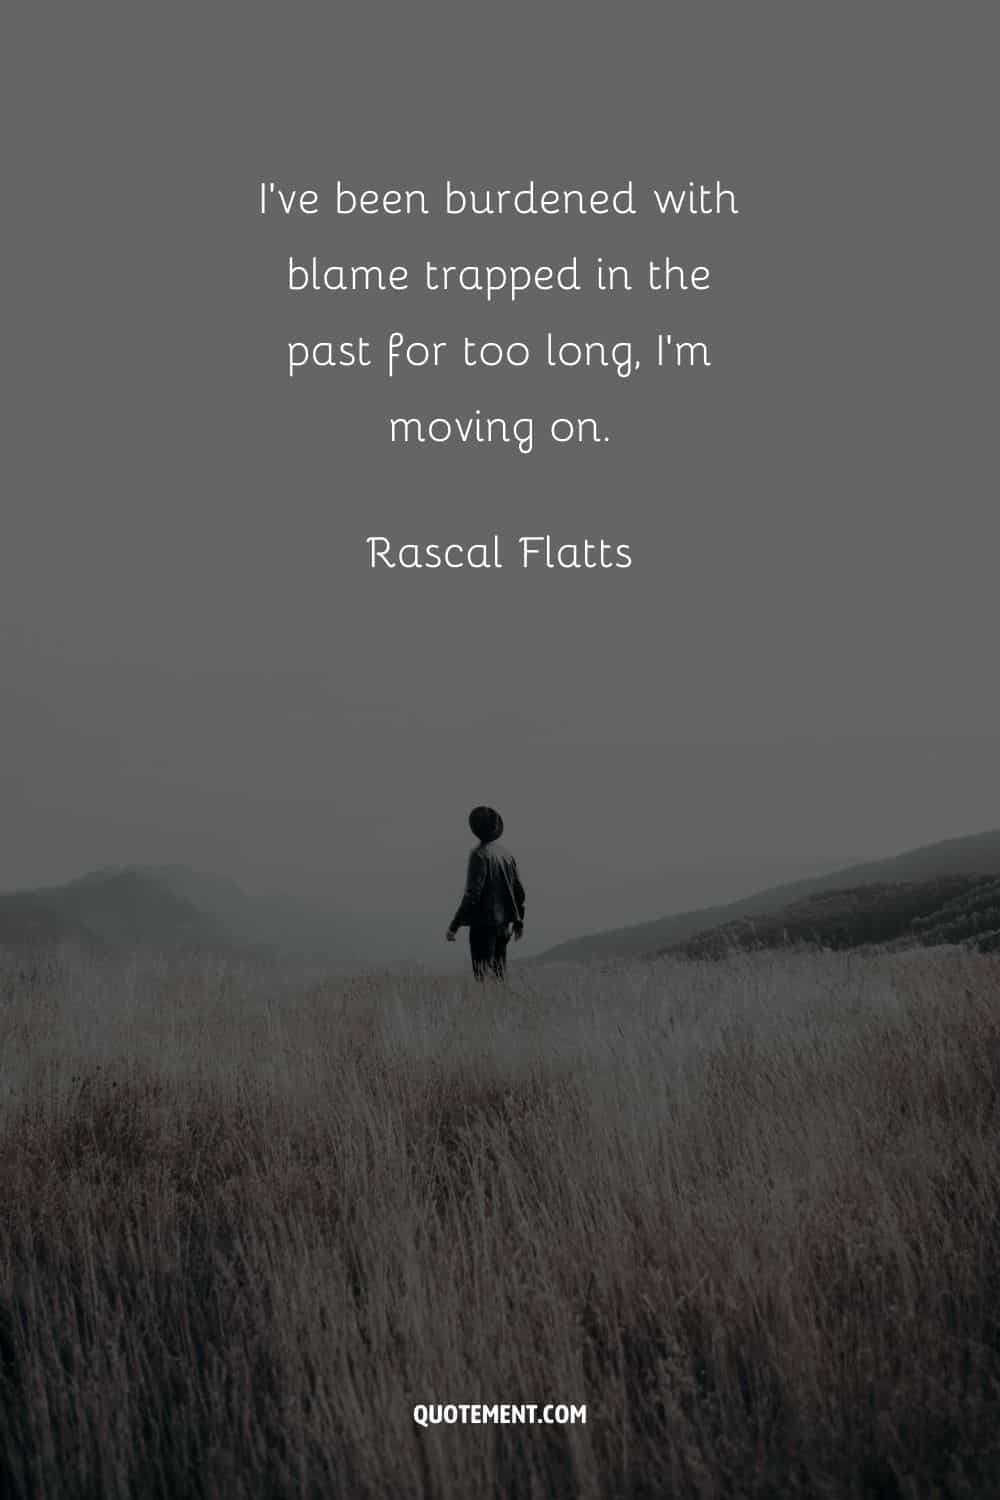 “I've been burdened with blame trapped in the past for too long, I'm moving on.” ― Rascal Flatts